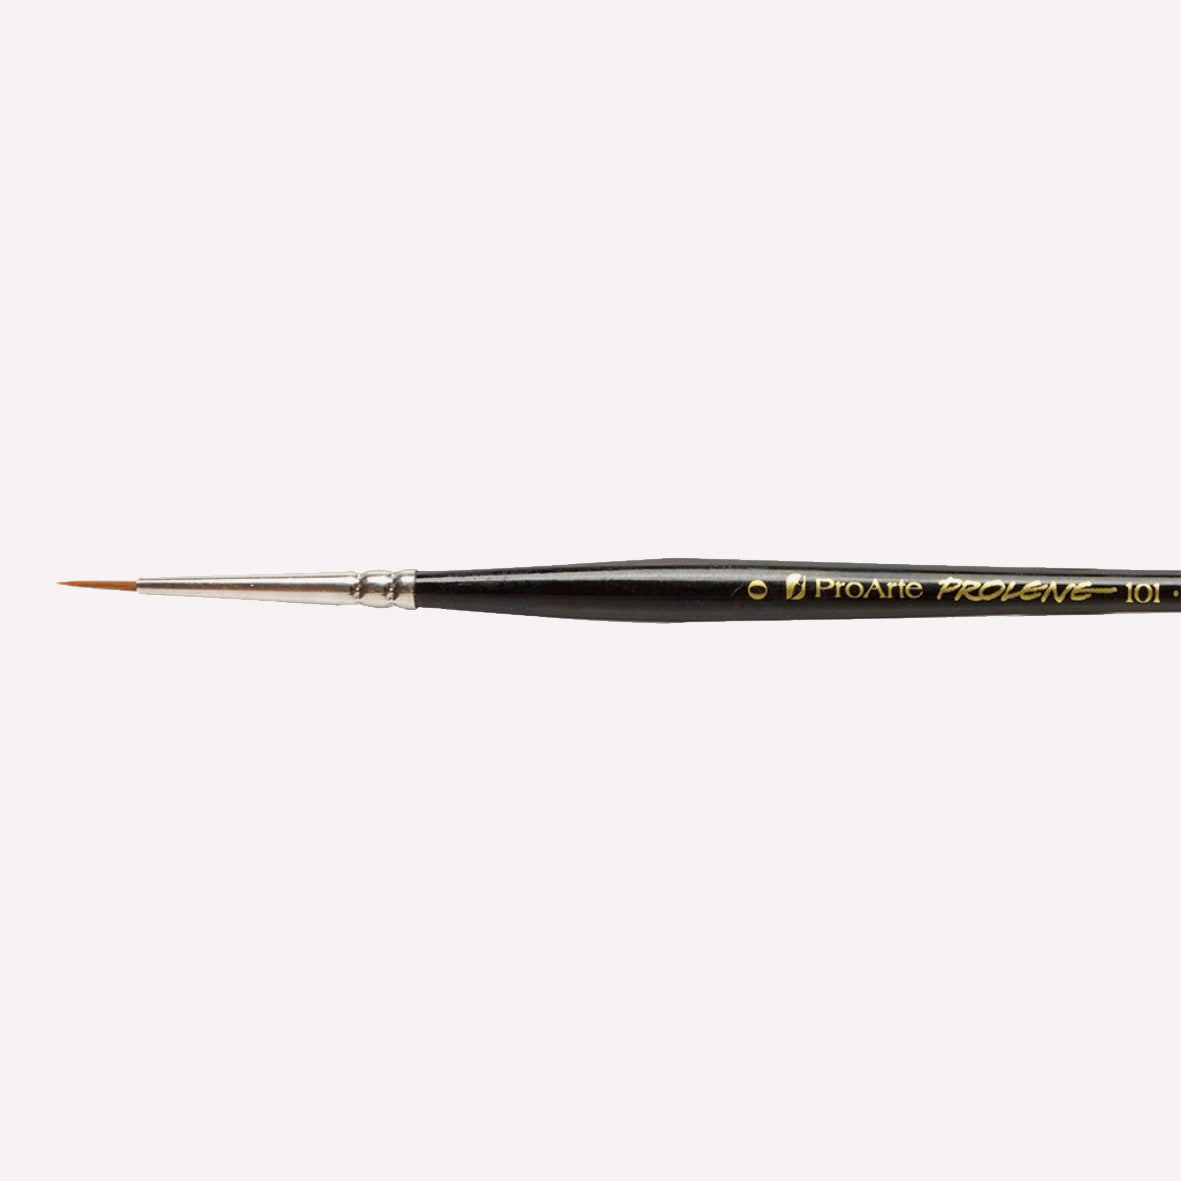 Pro Arte’s Prolene round paintbrush in size 101-0. Brushes have synthetic bristles, an ergonomic black handle and a silver ferrule. 